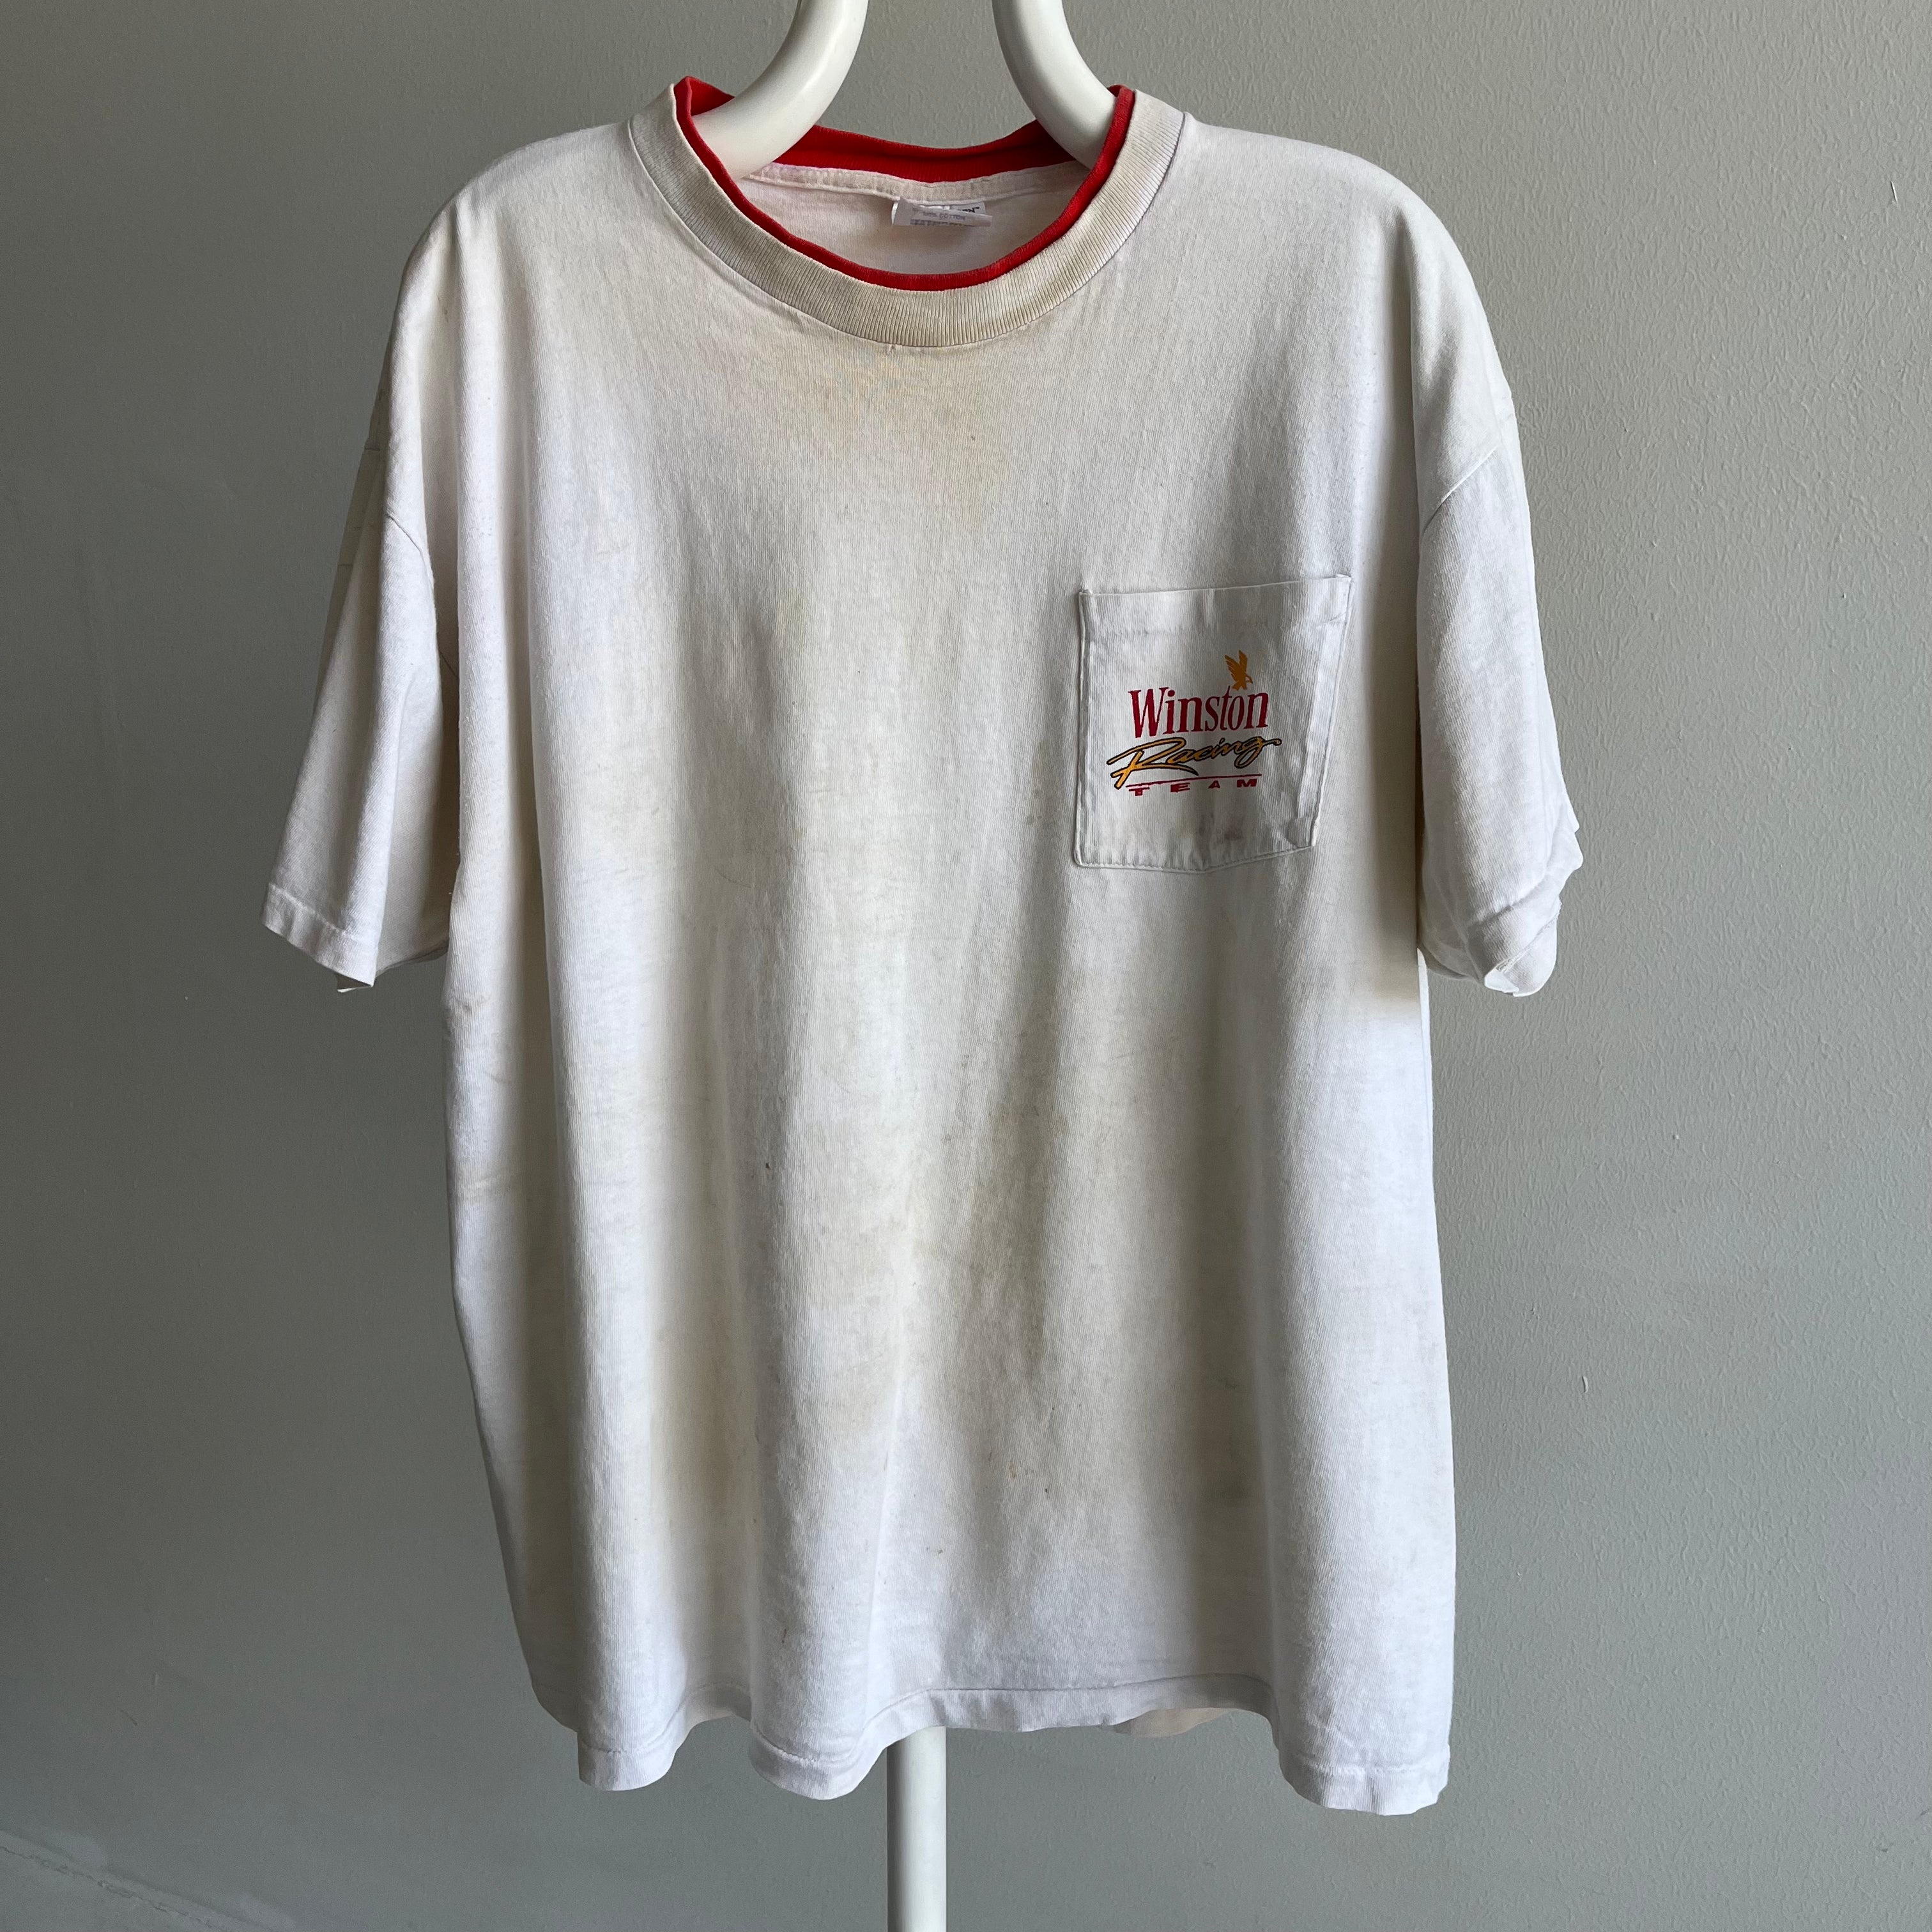 1992 Winston Racing Very Stained and Rad T-Shirt